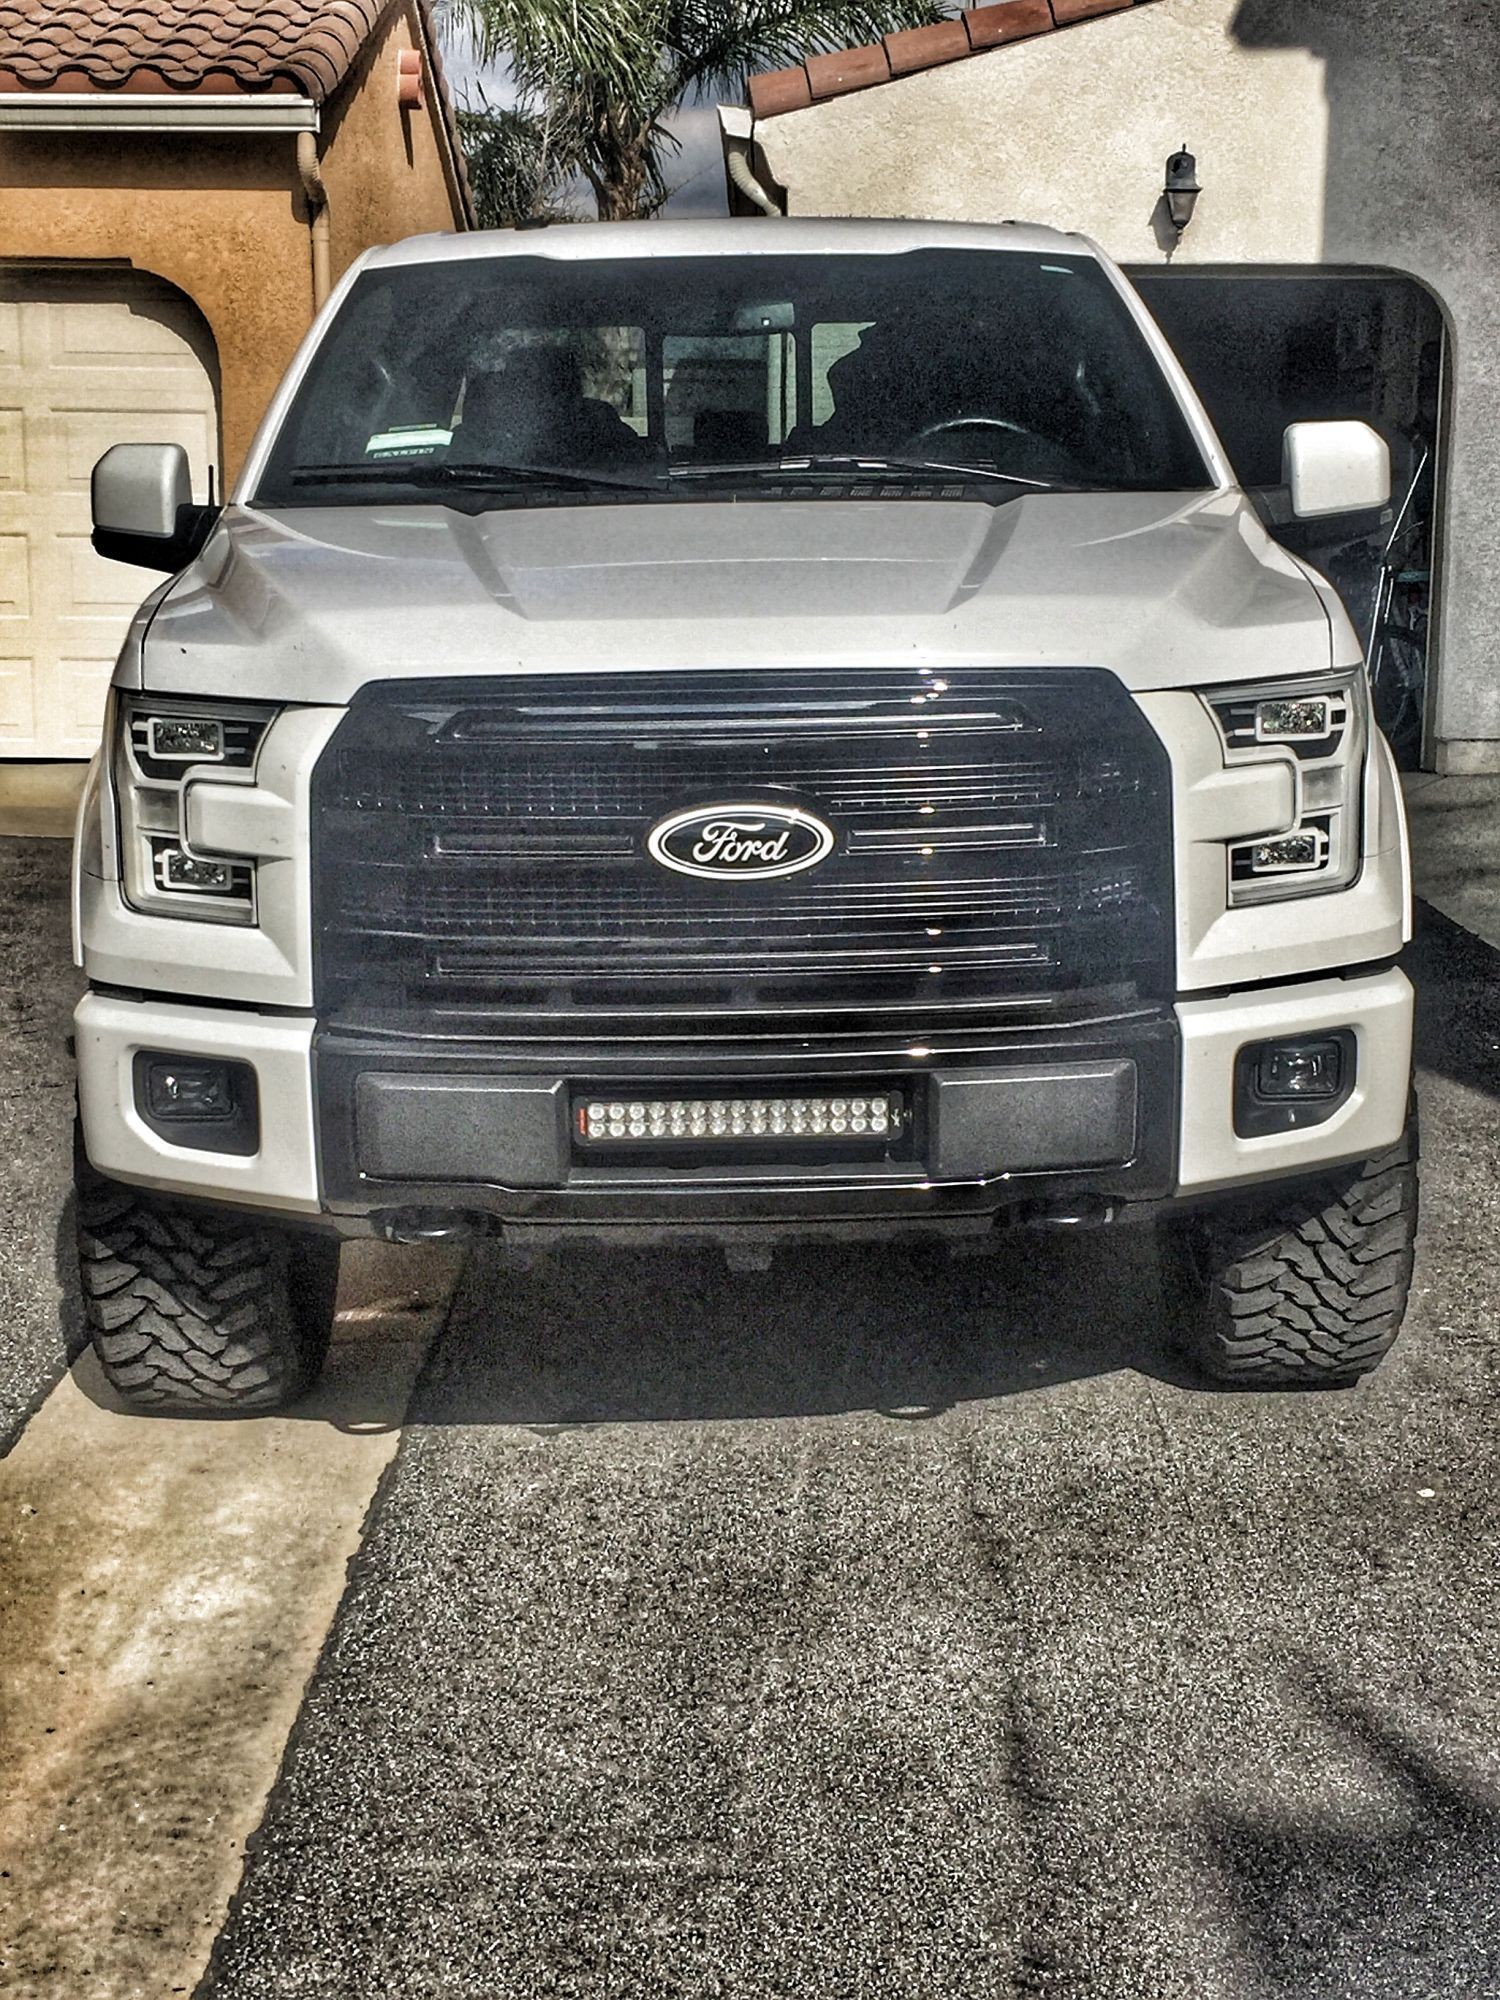 Page 4 Ford F150 Forum munity of Ford Truck Fans